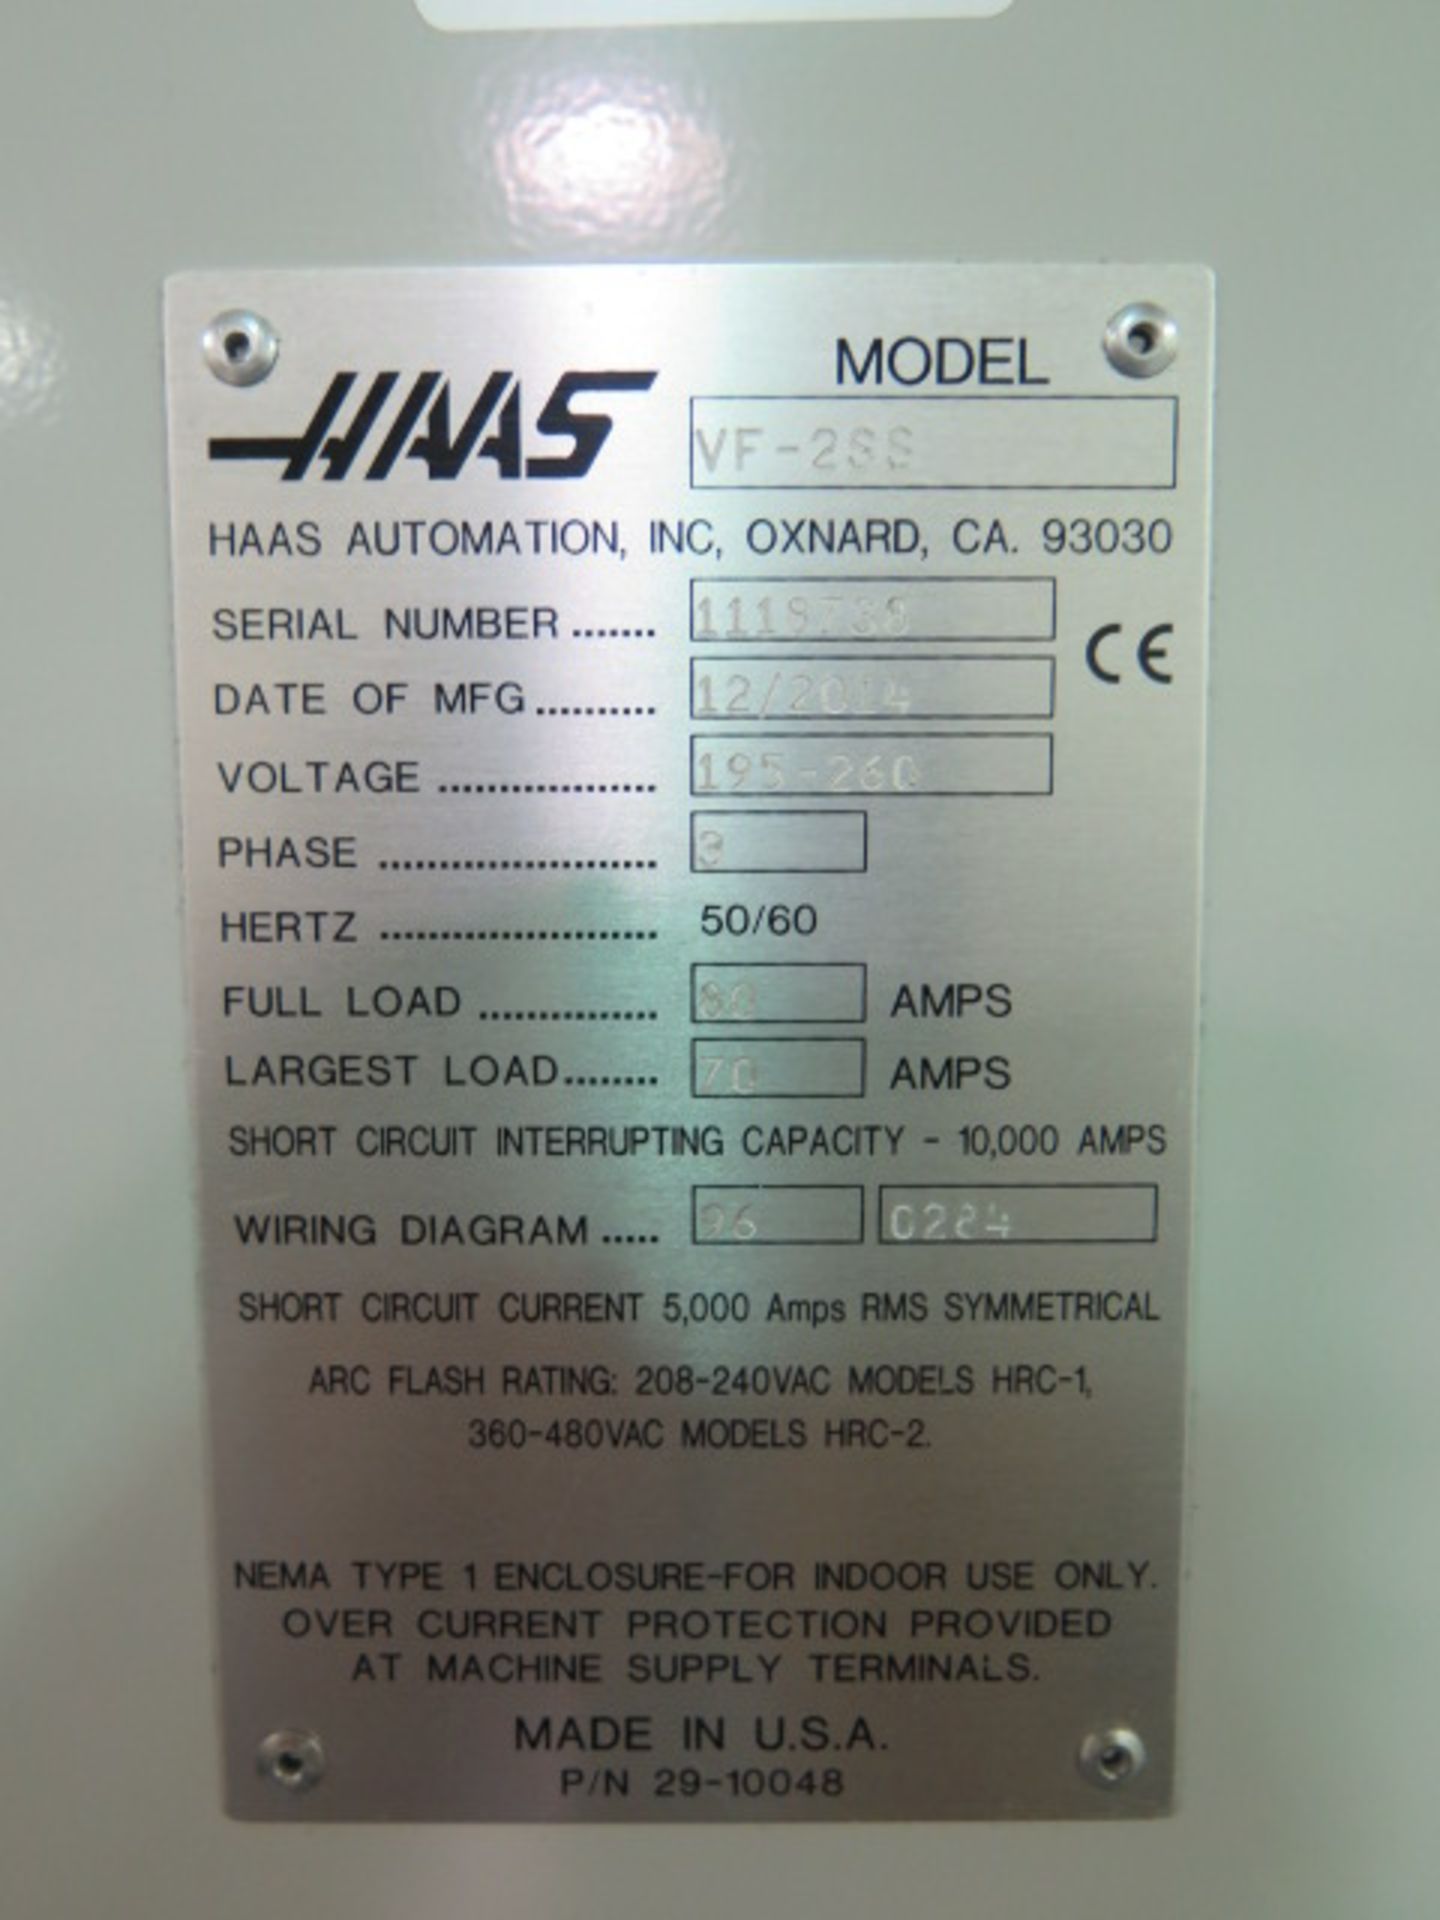 DEC 2014 Haas VF-2SS 4-Axis CNC Vertical Machining Center s/n 1118738 w/ Haas Controls, 24-Station - Image 13 of 13